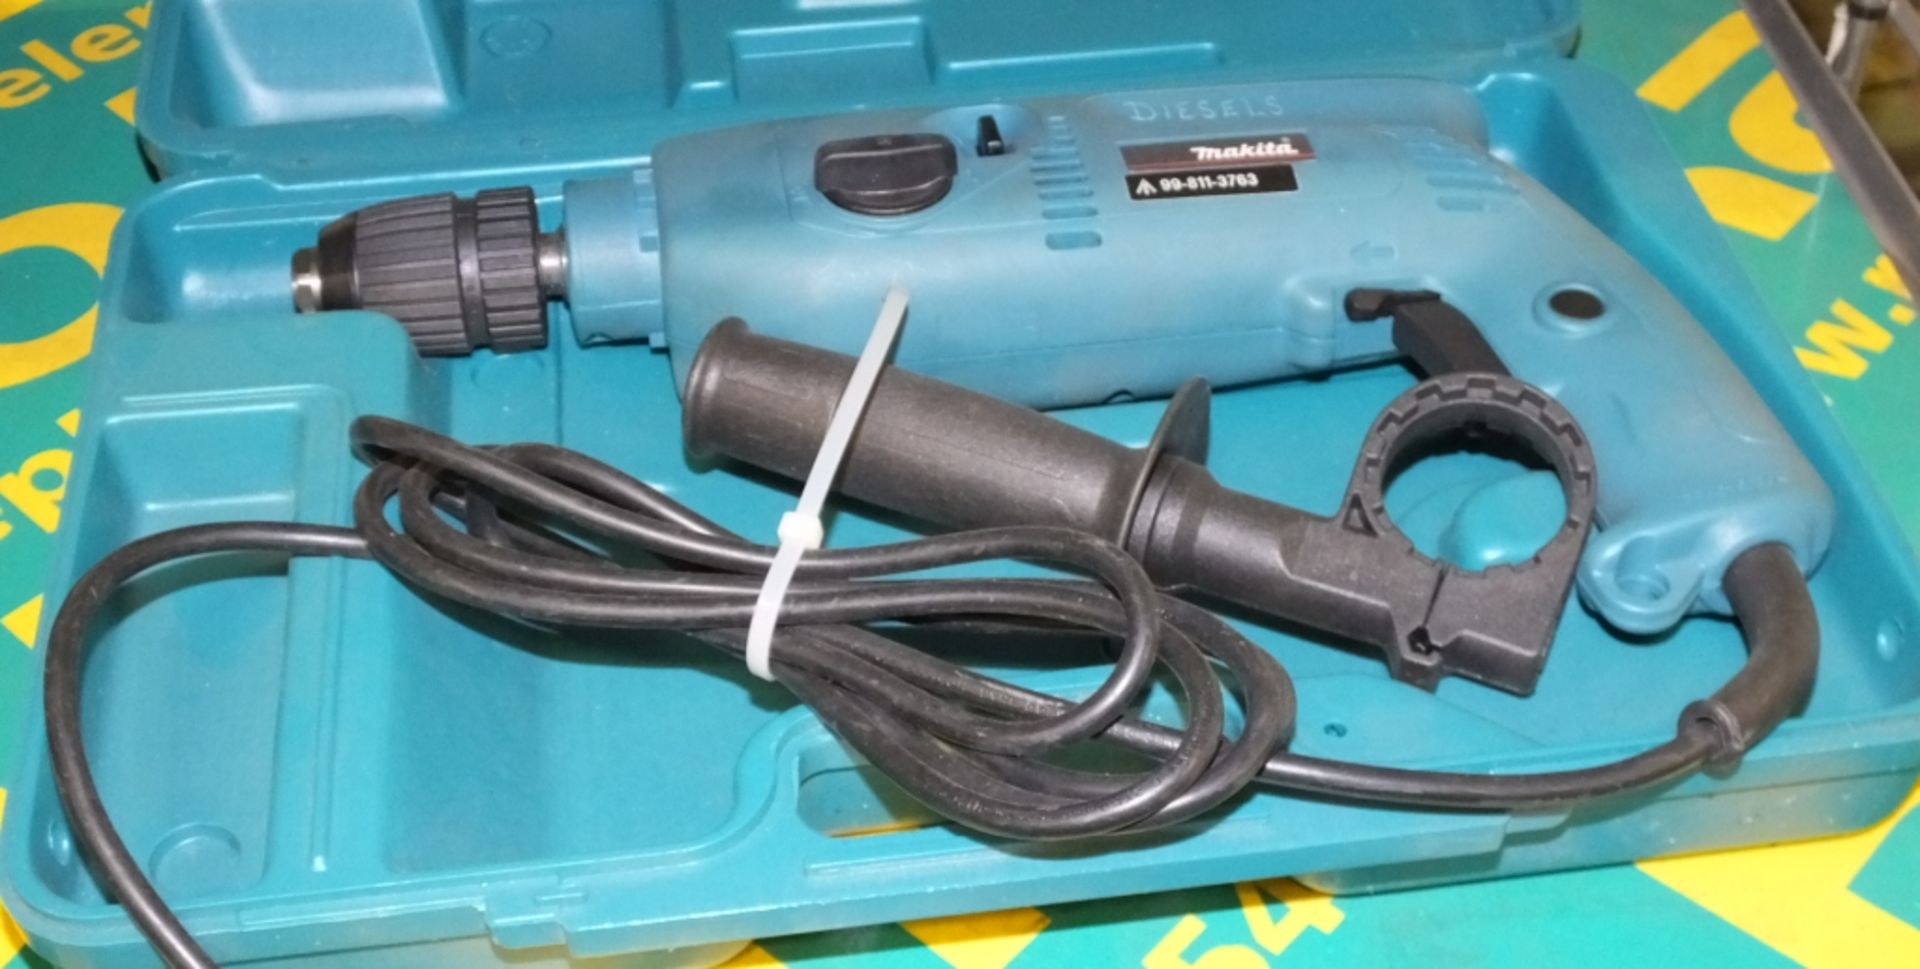 Makita HP2041 power drill in case, Parkside PABS-18-Li-B2 cordless drill - 1 battery, 1 ch - Image 2 of 3